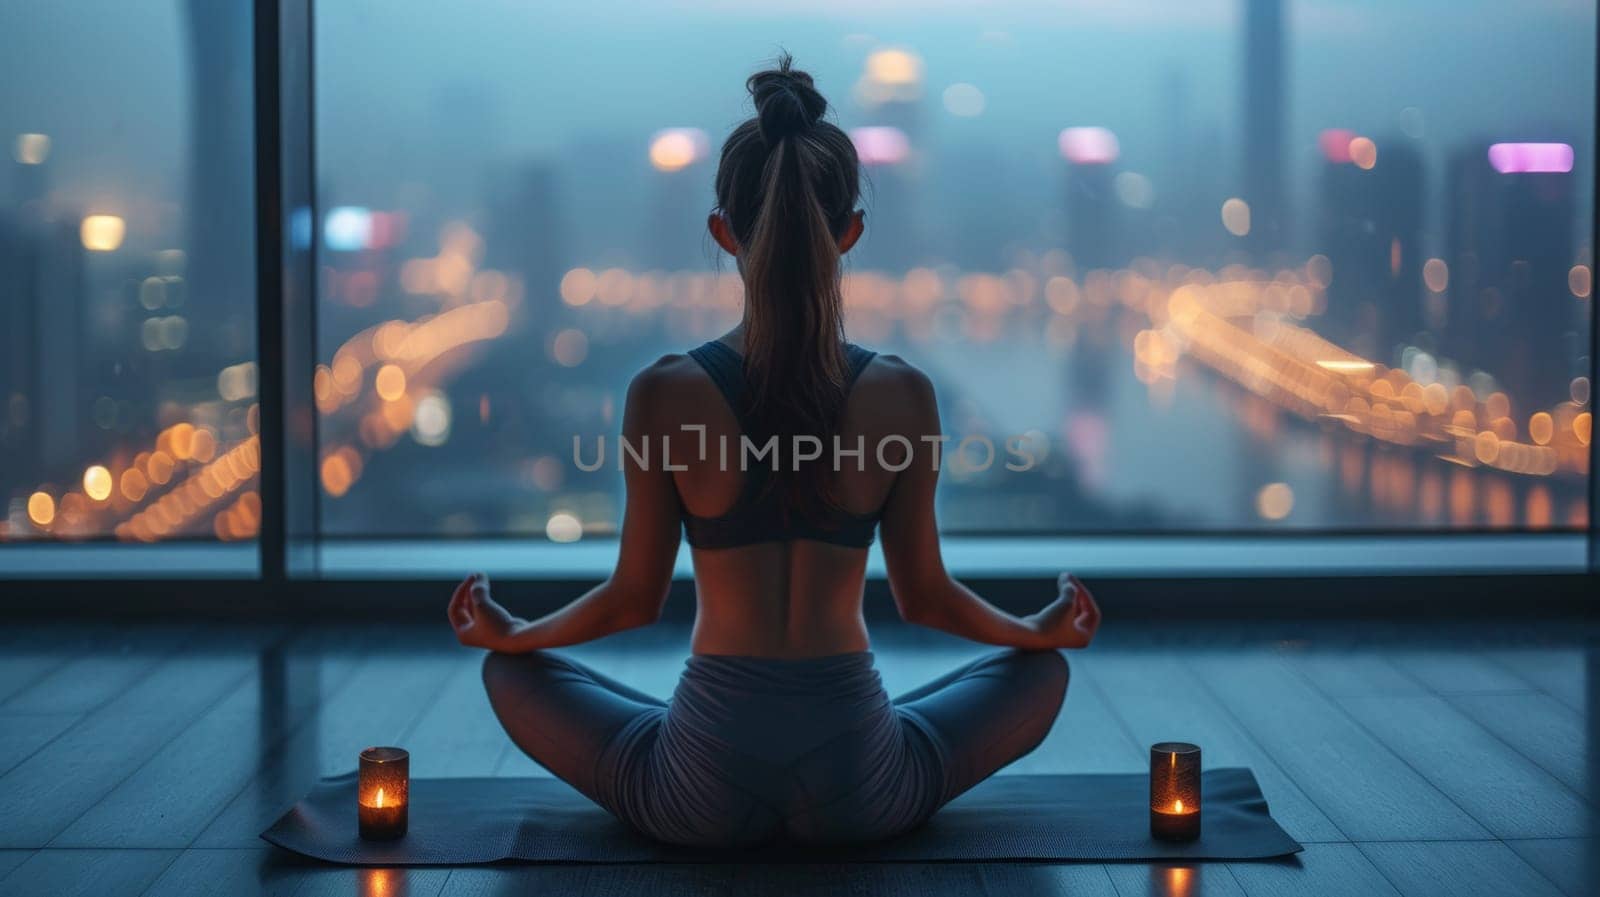 A woman sitting in a lotus position with candles lit